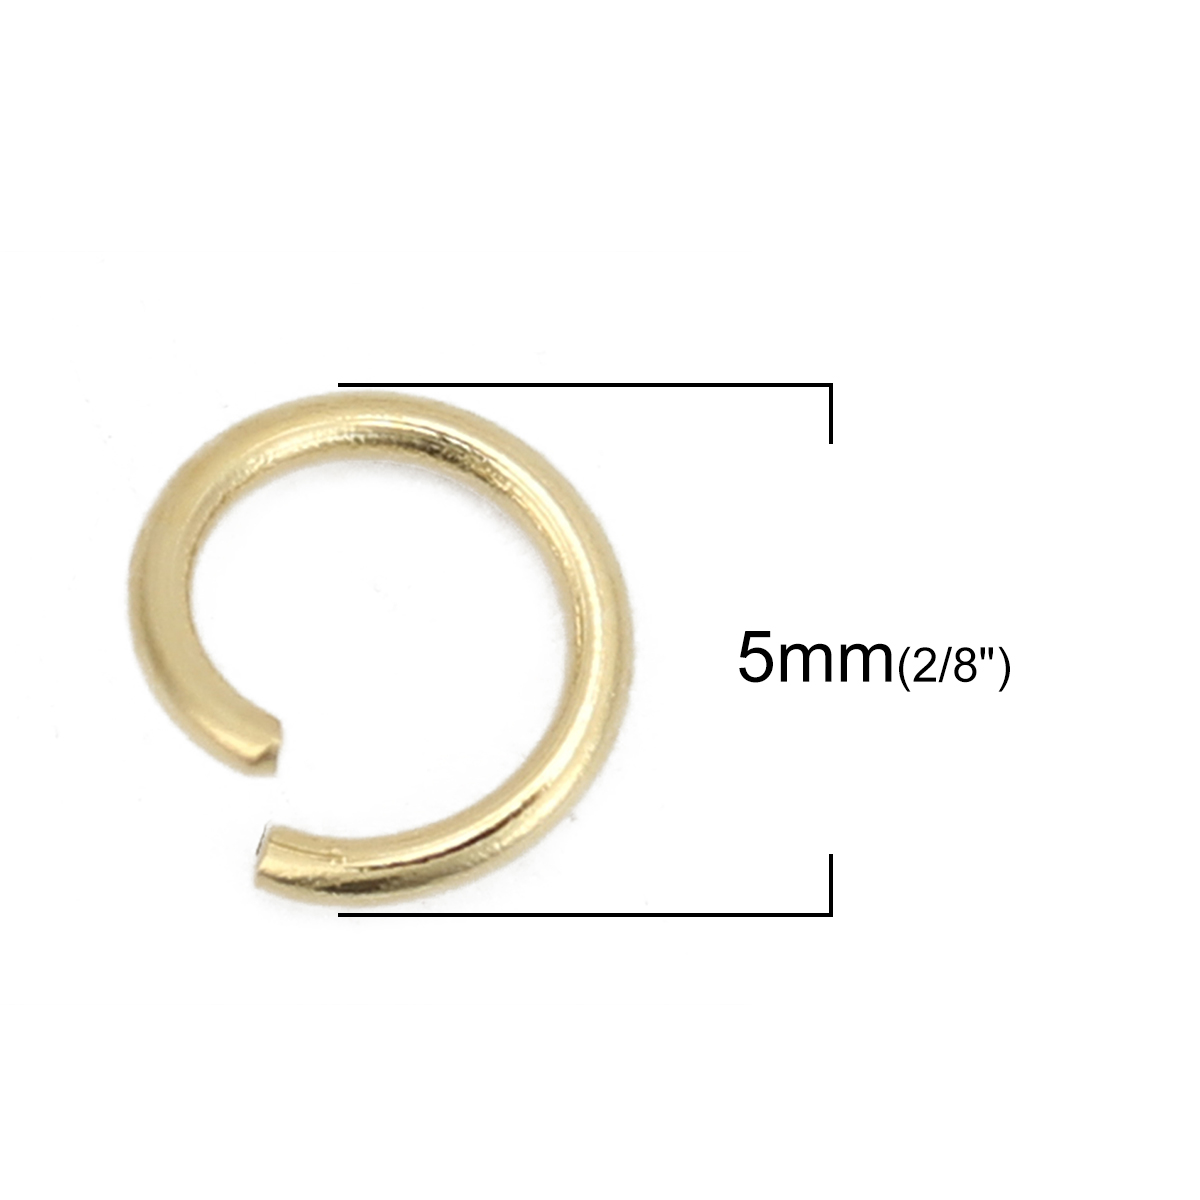 Picture of 0.7mm 304 Stainless Steel Opened Jump Rings Findings Gold Plated 5mm( 2/8") Dia., 200 PCs